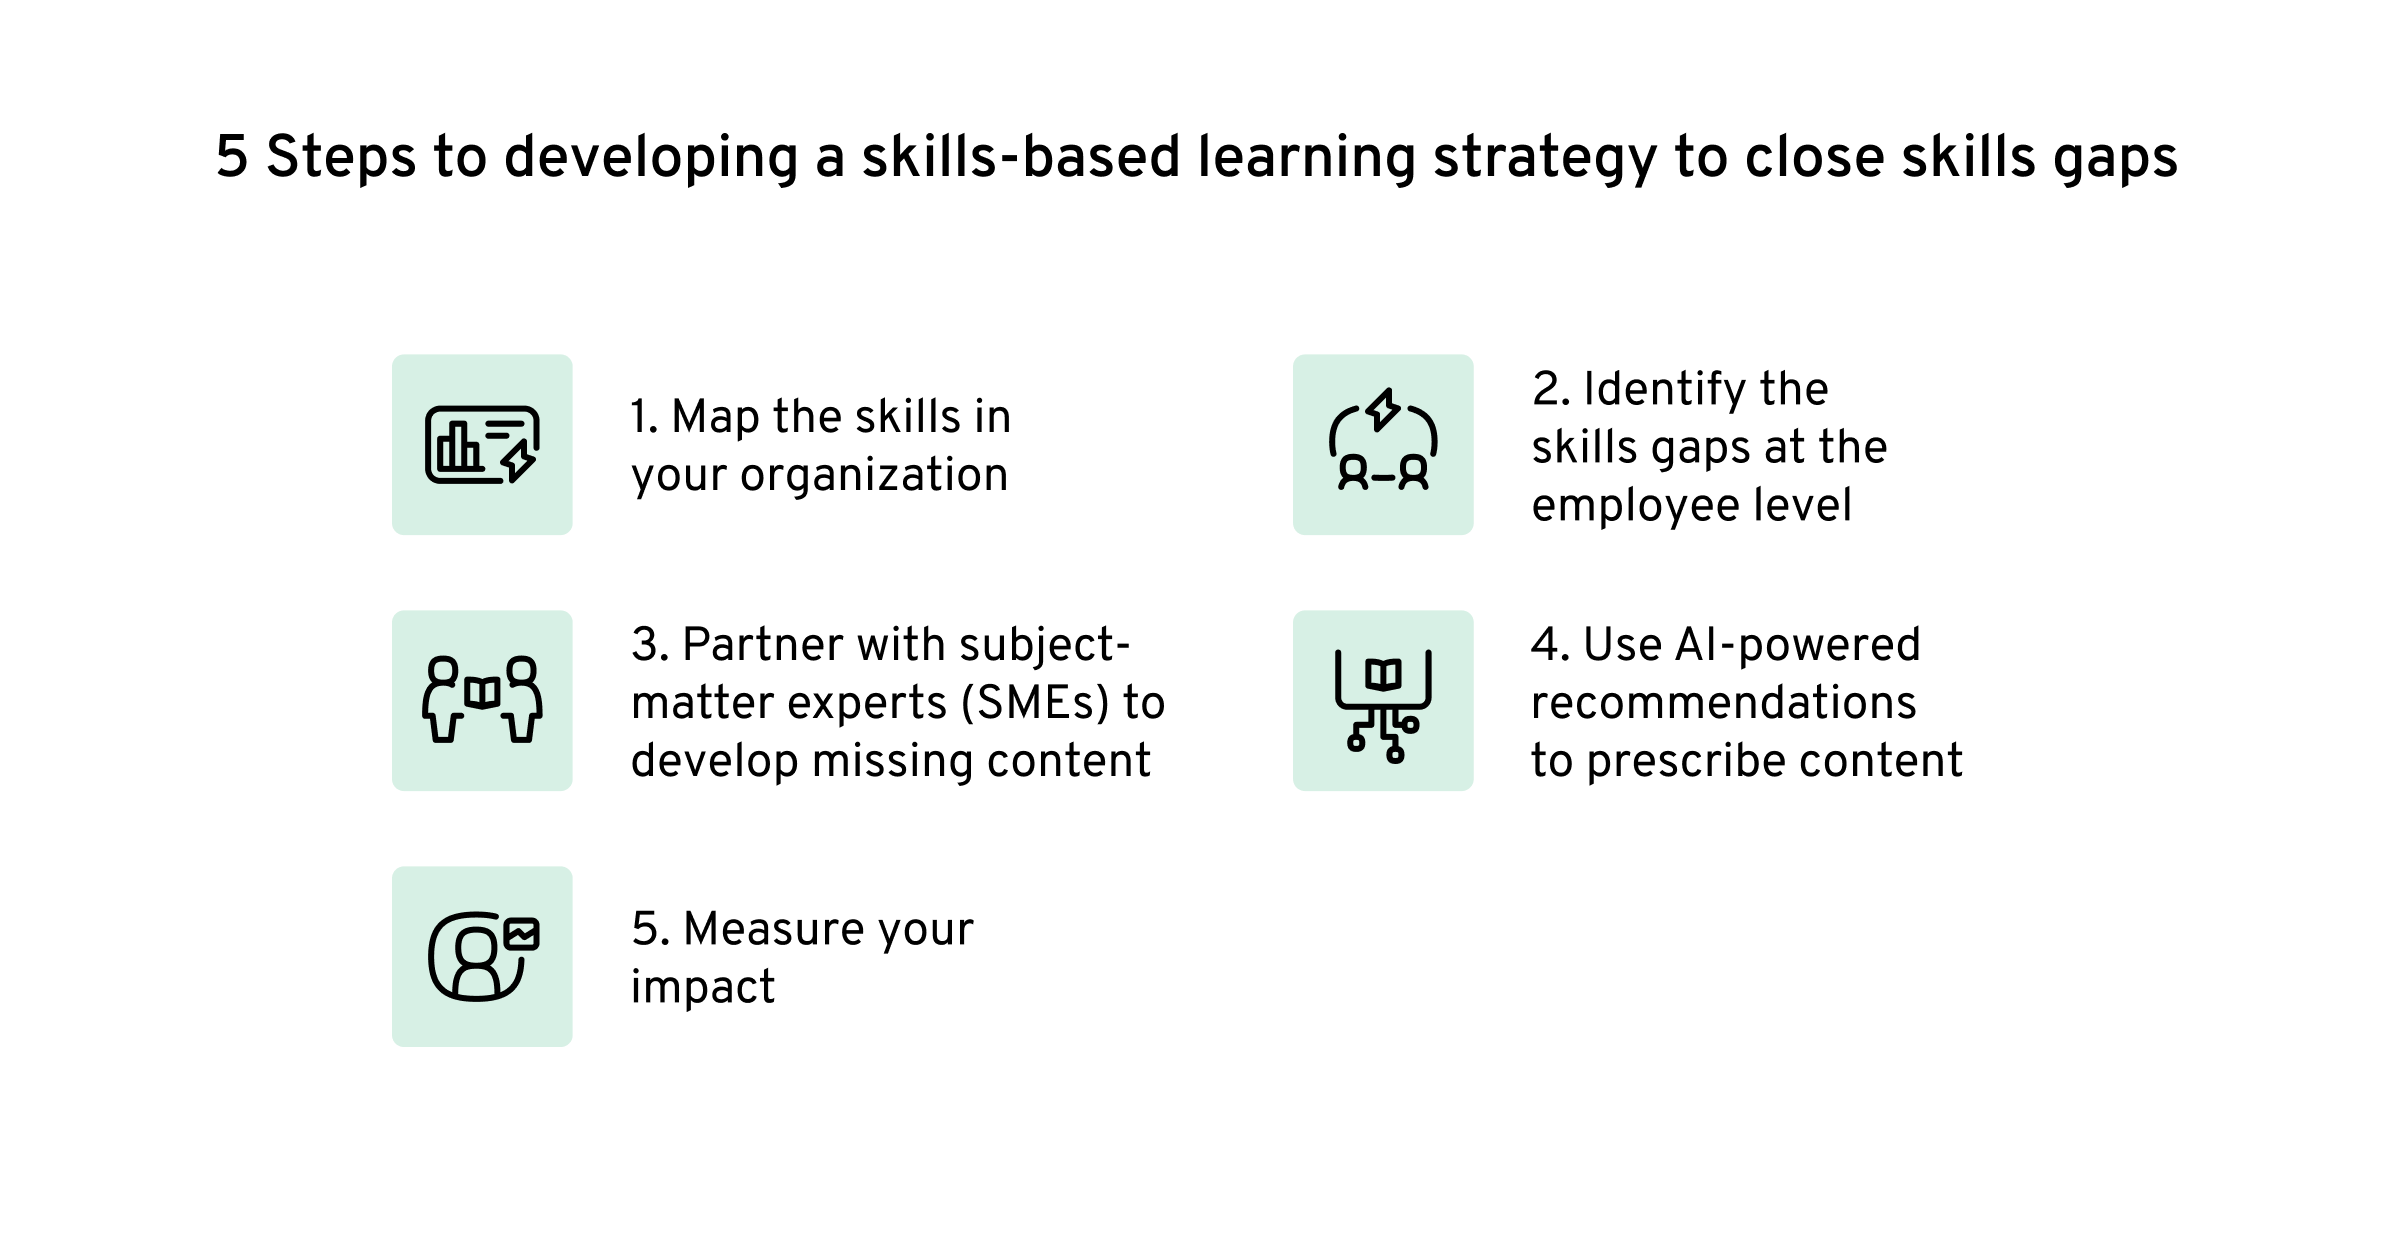 5 steps to developing a skills-based learning strategy